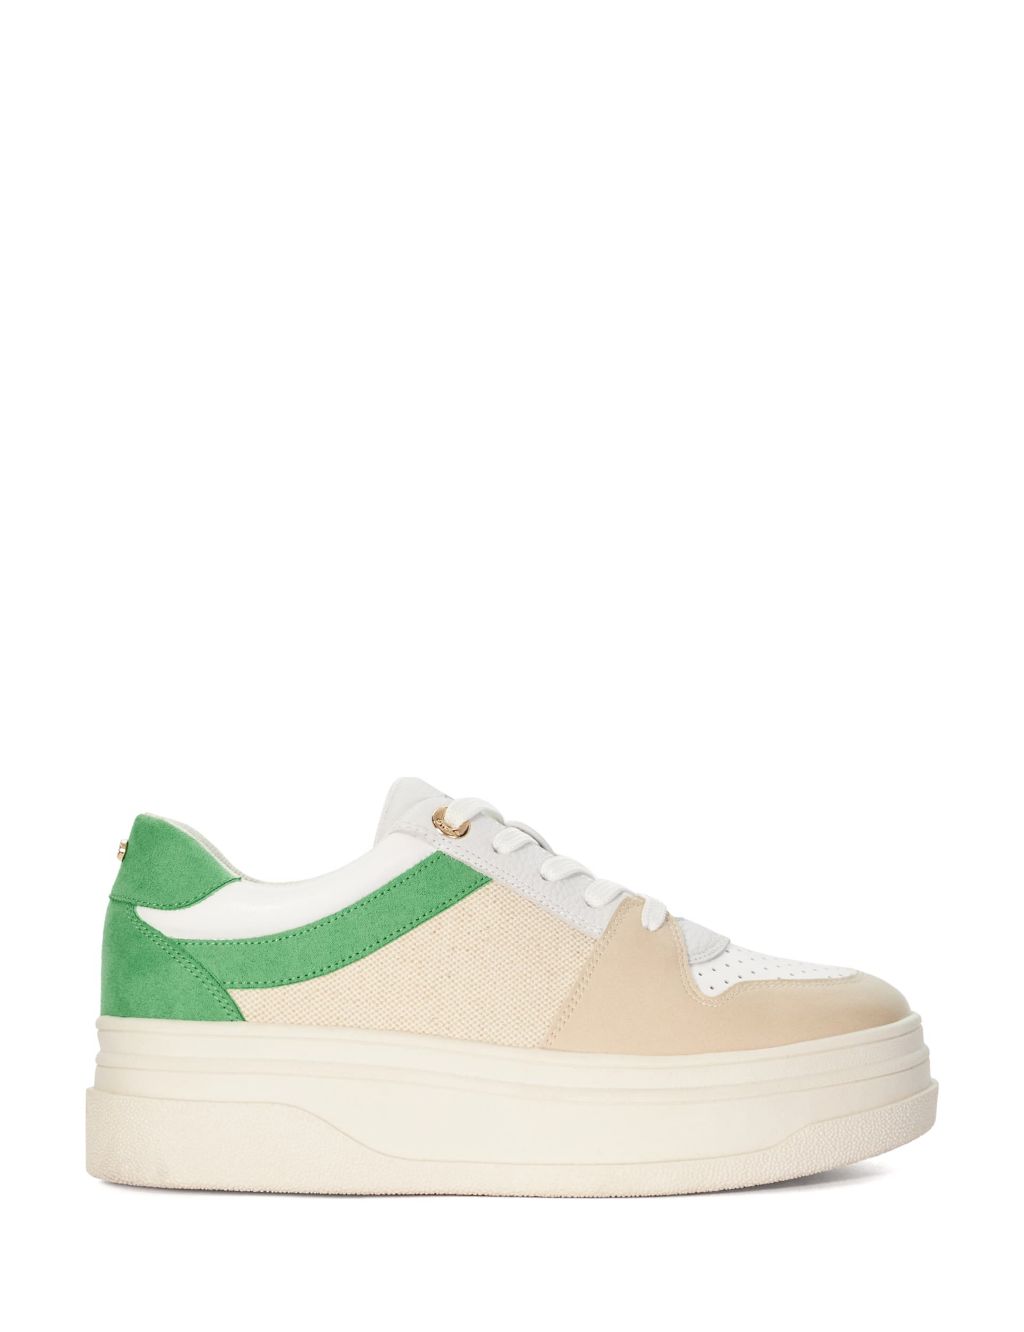 Leather Lace Up Flatform Trainers